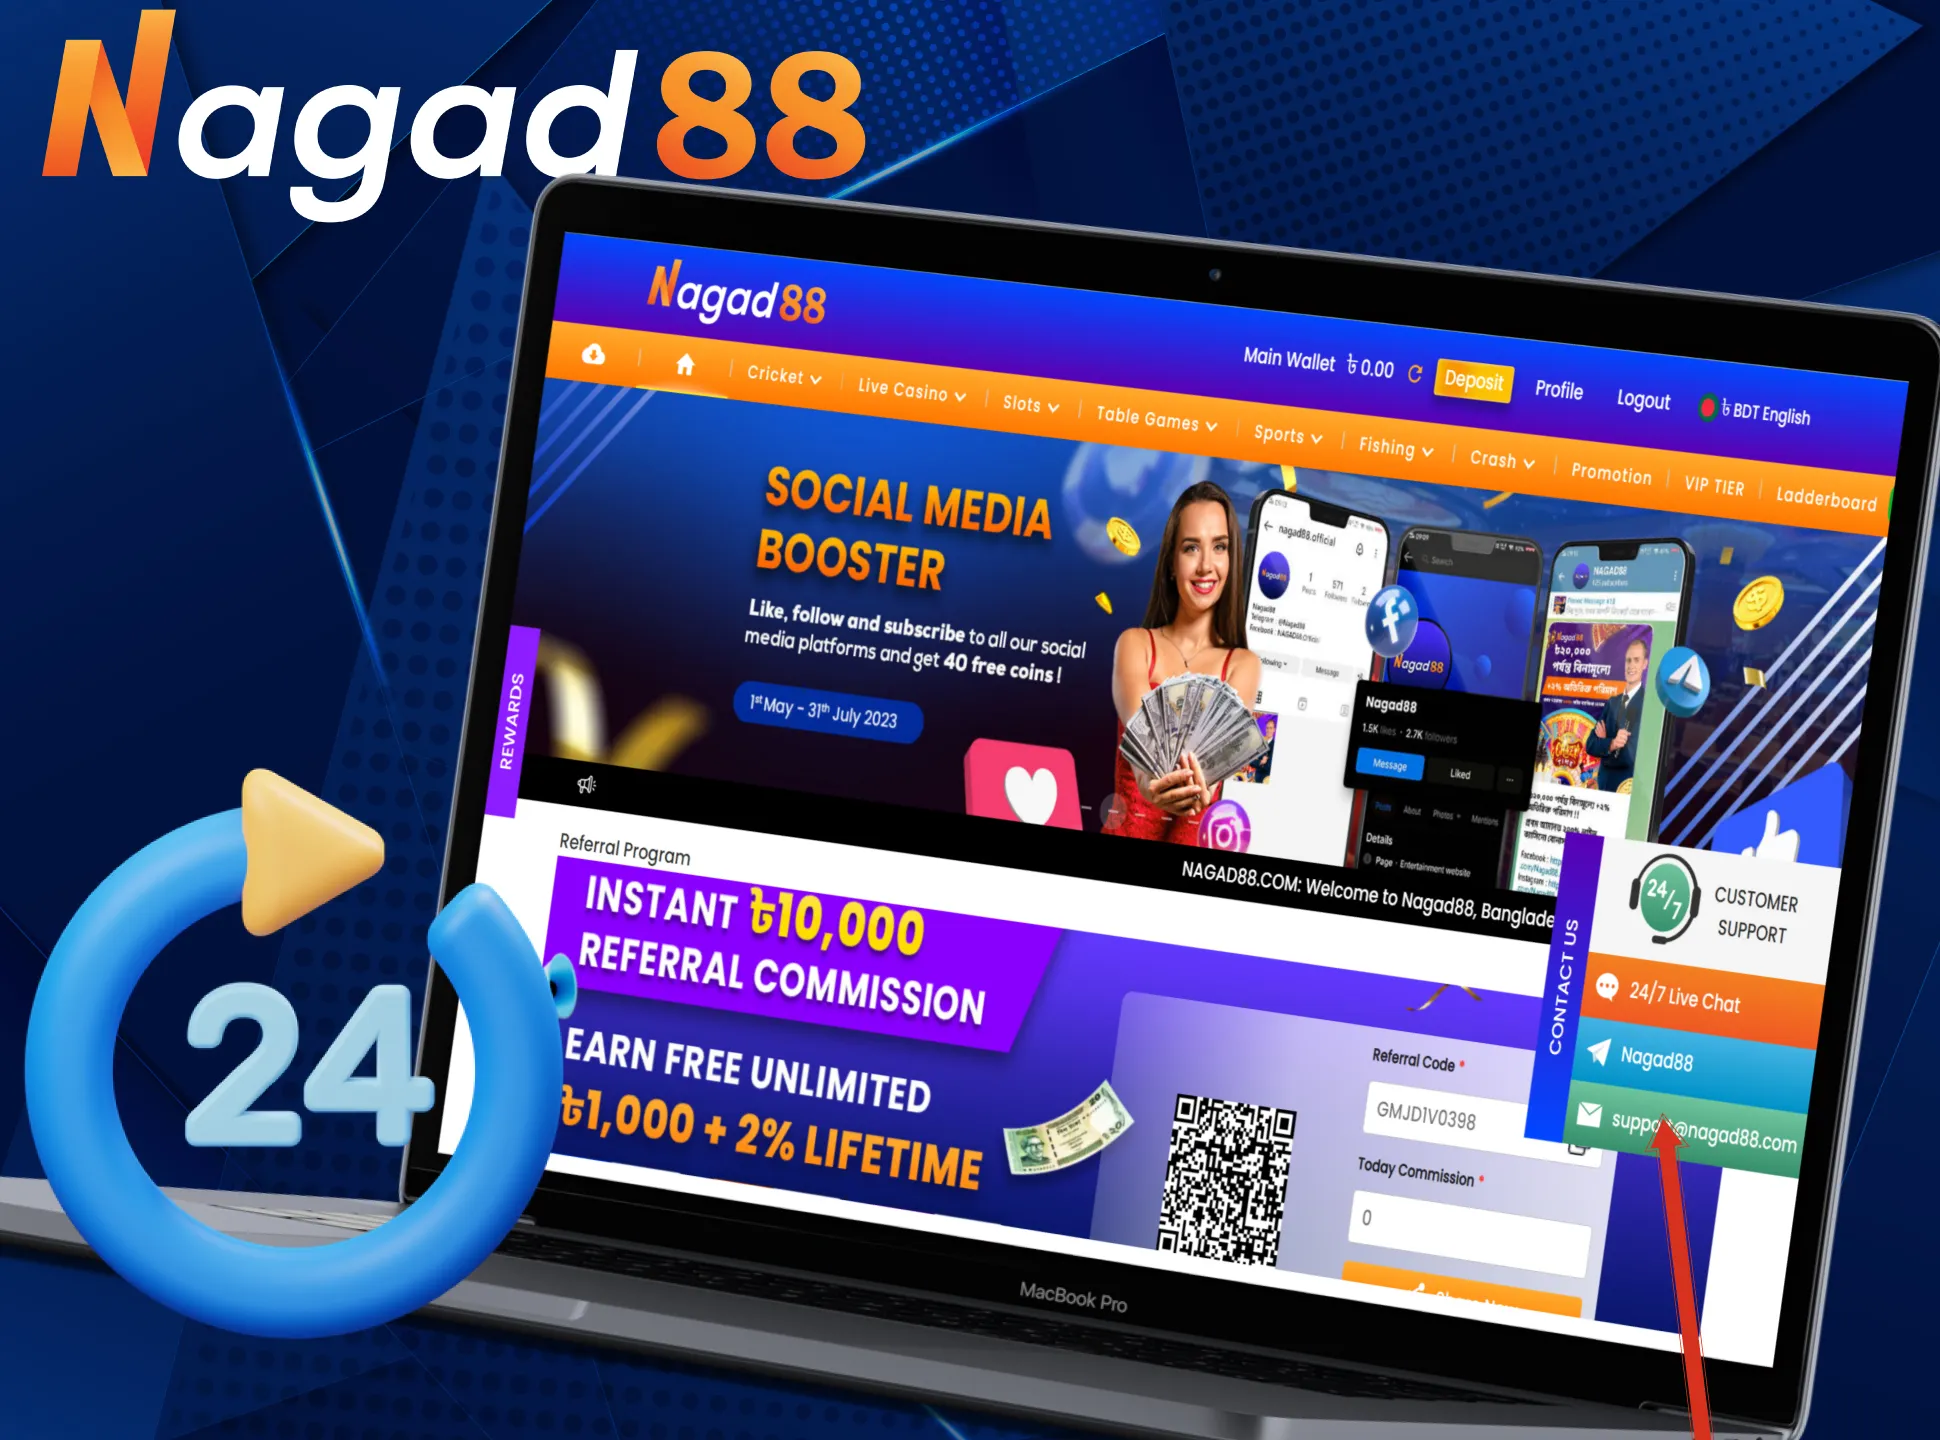 Nagad88 supports its users 24 hours a day.